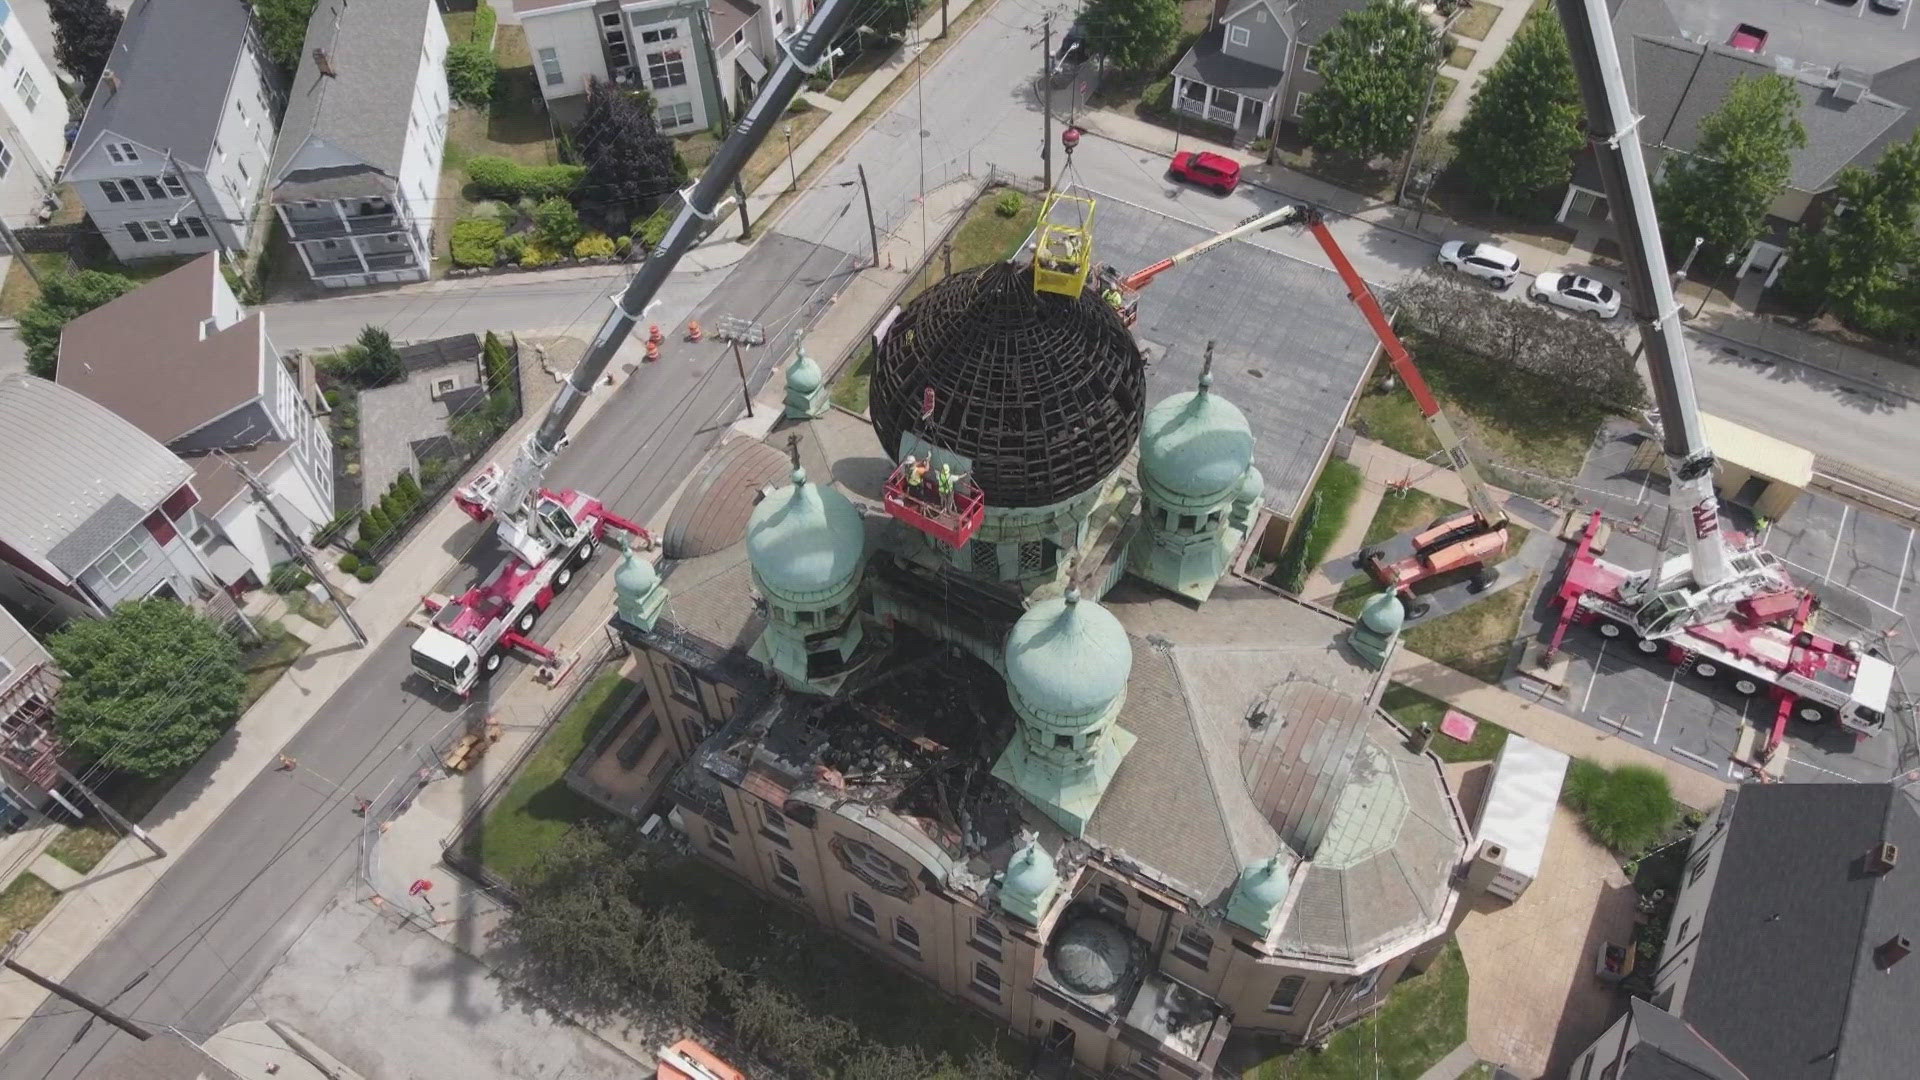 The GoFundMe was created by Father Jan Cizmar, who spoke with 3News last week about the fire at the historic church.